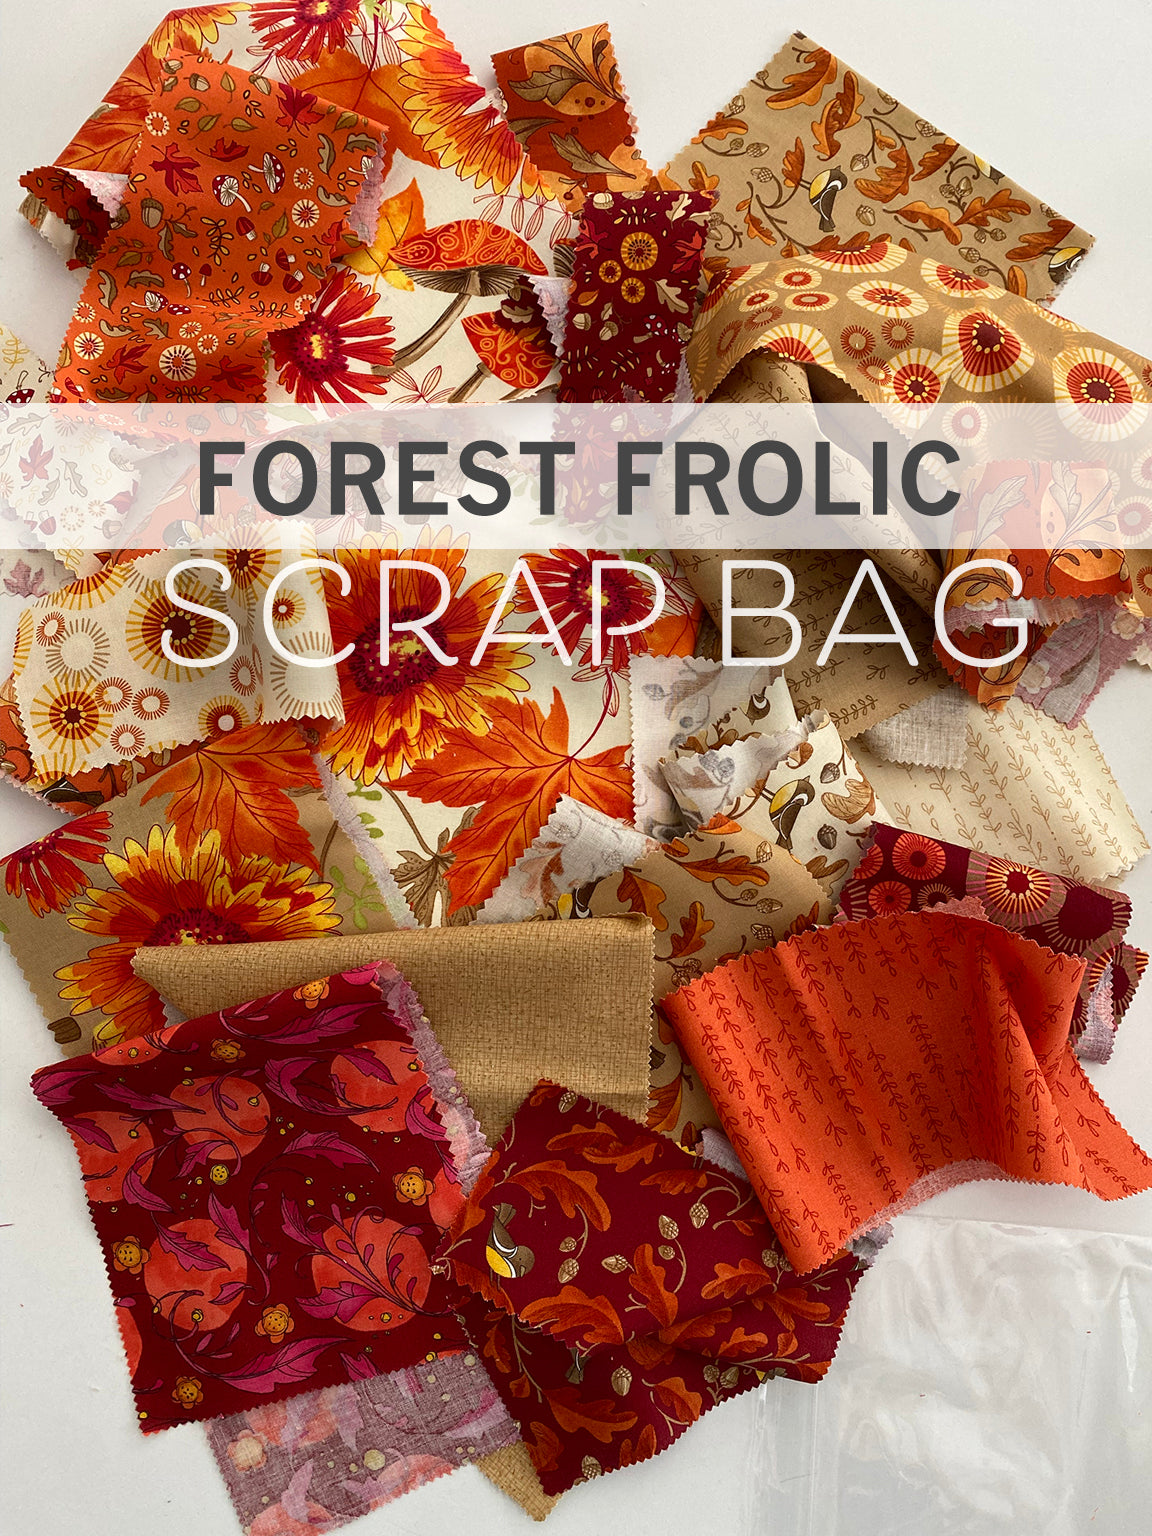 Scrap Bag of Forest Frolic Quilting Fabric - Moda fabric by Robin Pickens